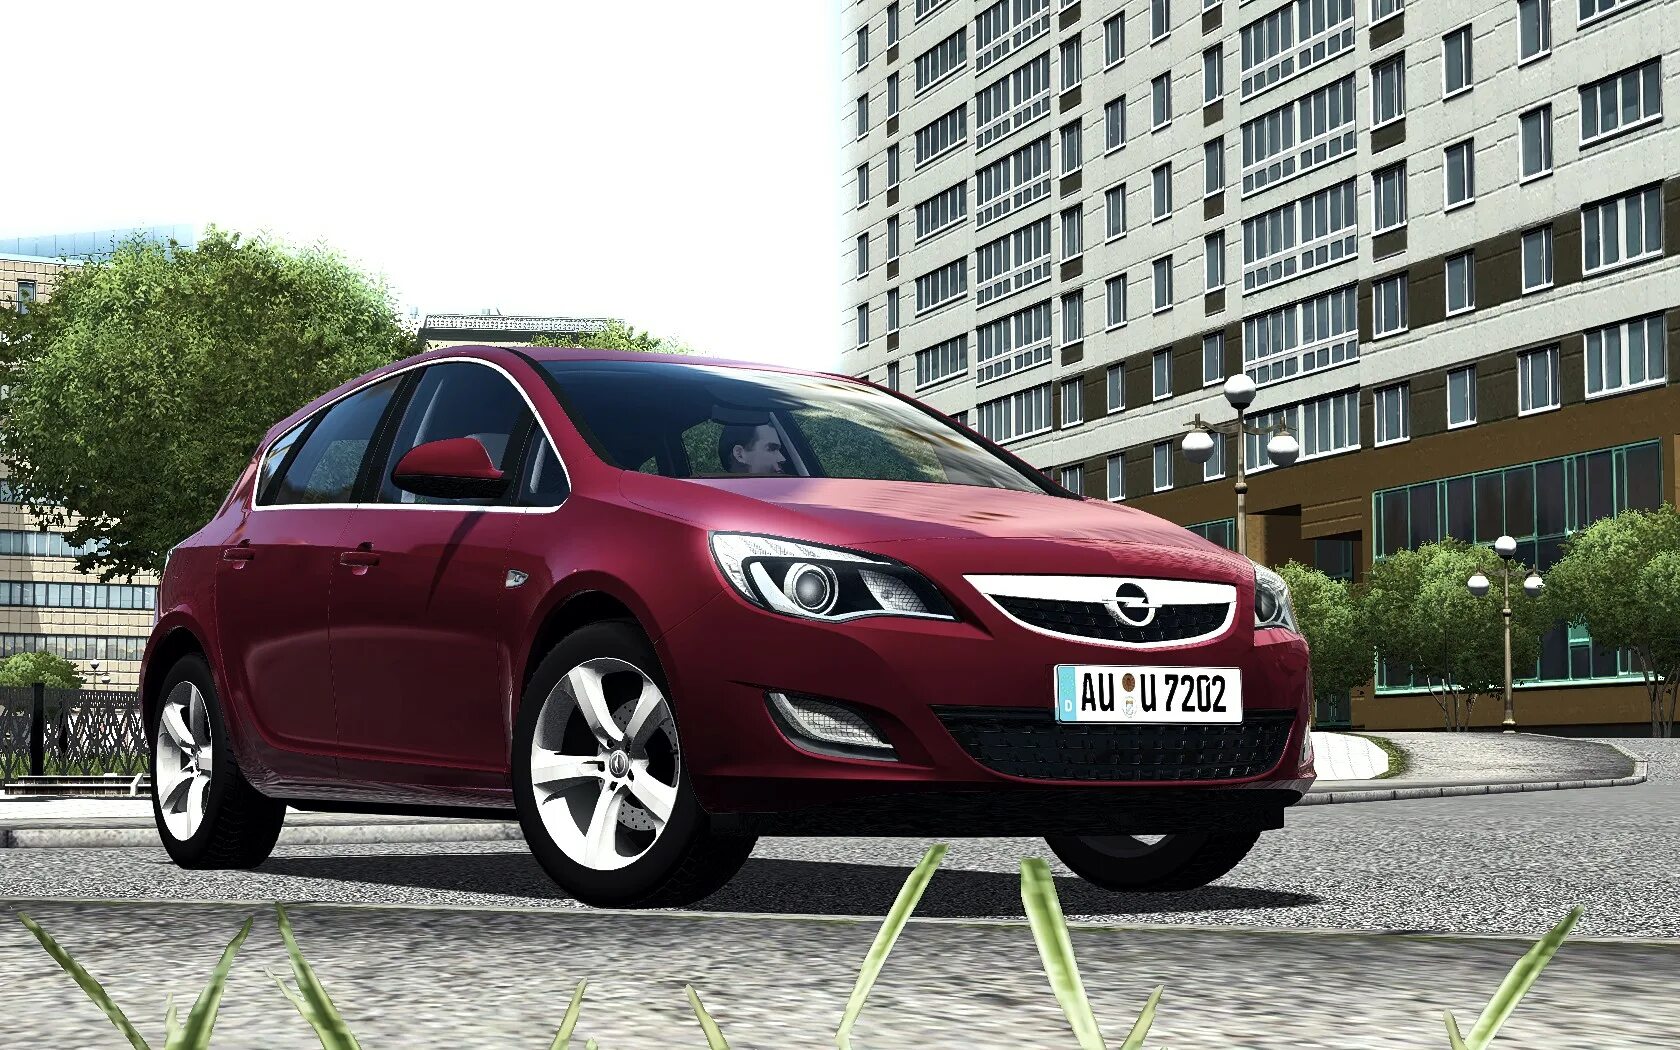 Opel Astra City car Driving 1.5.9.2. Opel Astra g для City car Driving. Opel city